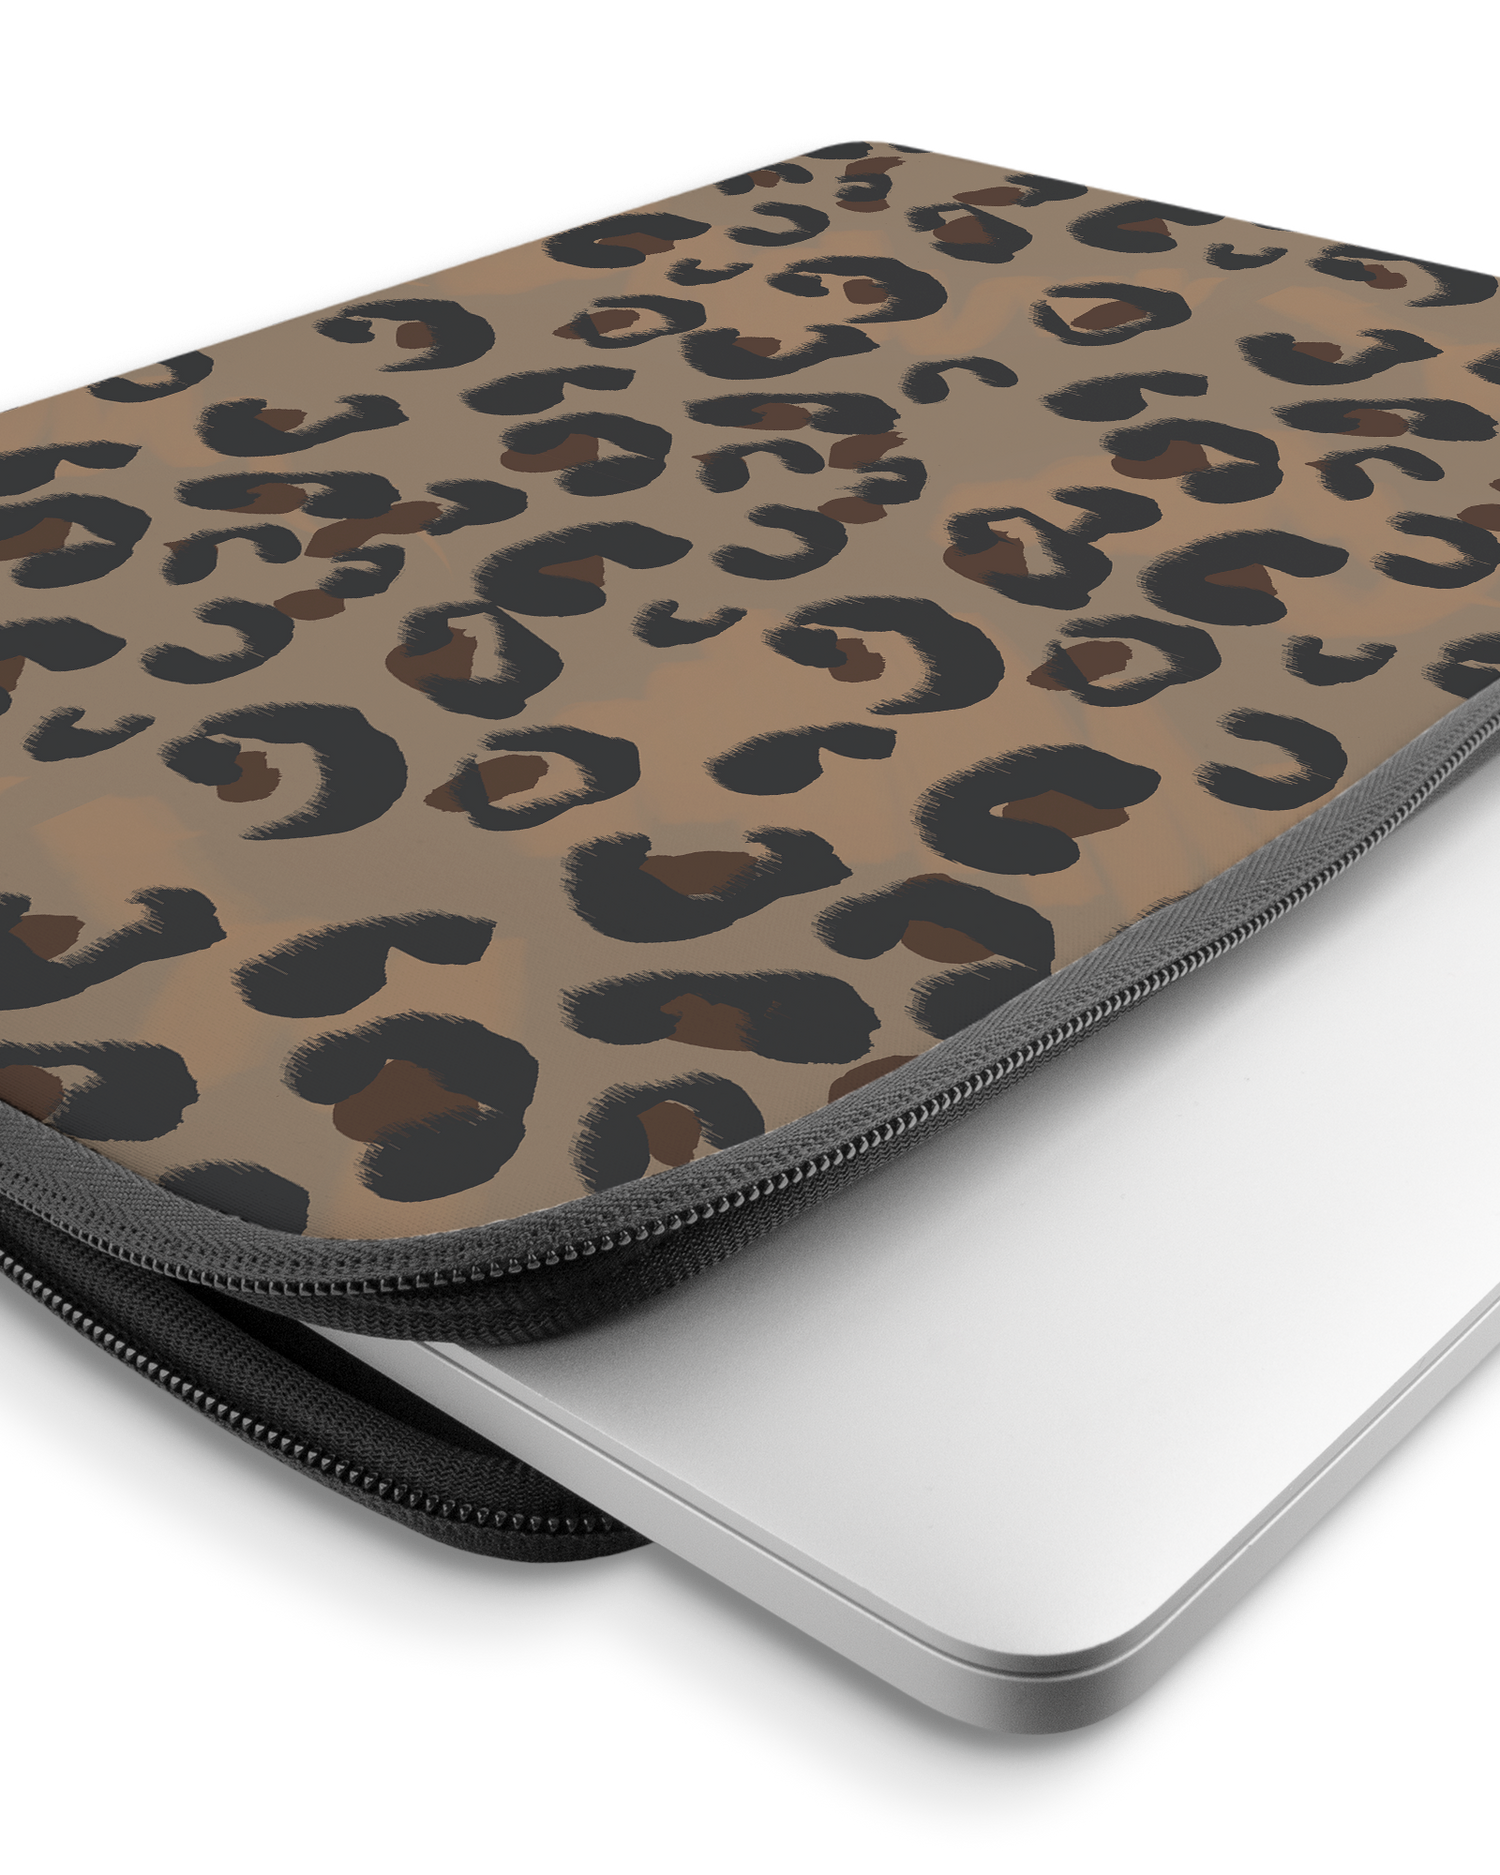 Leopard Repeat Laptop Case 15-16 inch with device inside